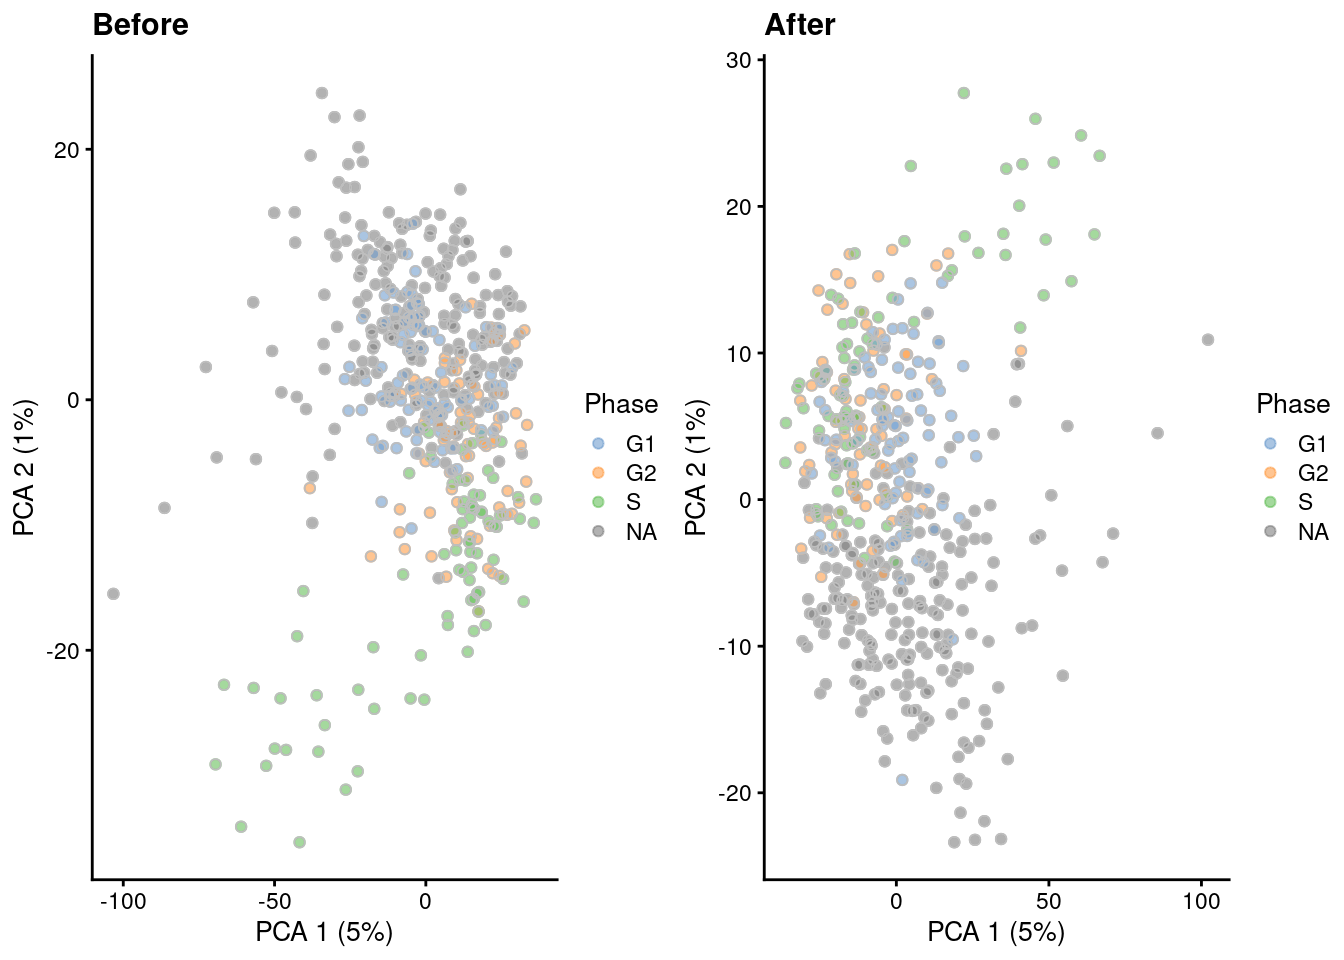 PCA plots of the Leng ESC dataset, generated before and after removal of cell cycle-related genes. Each point corresponds to a cell that is colored by the sorted cell cycle phase.